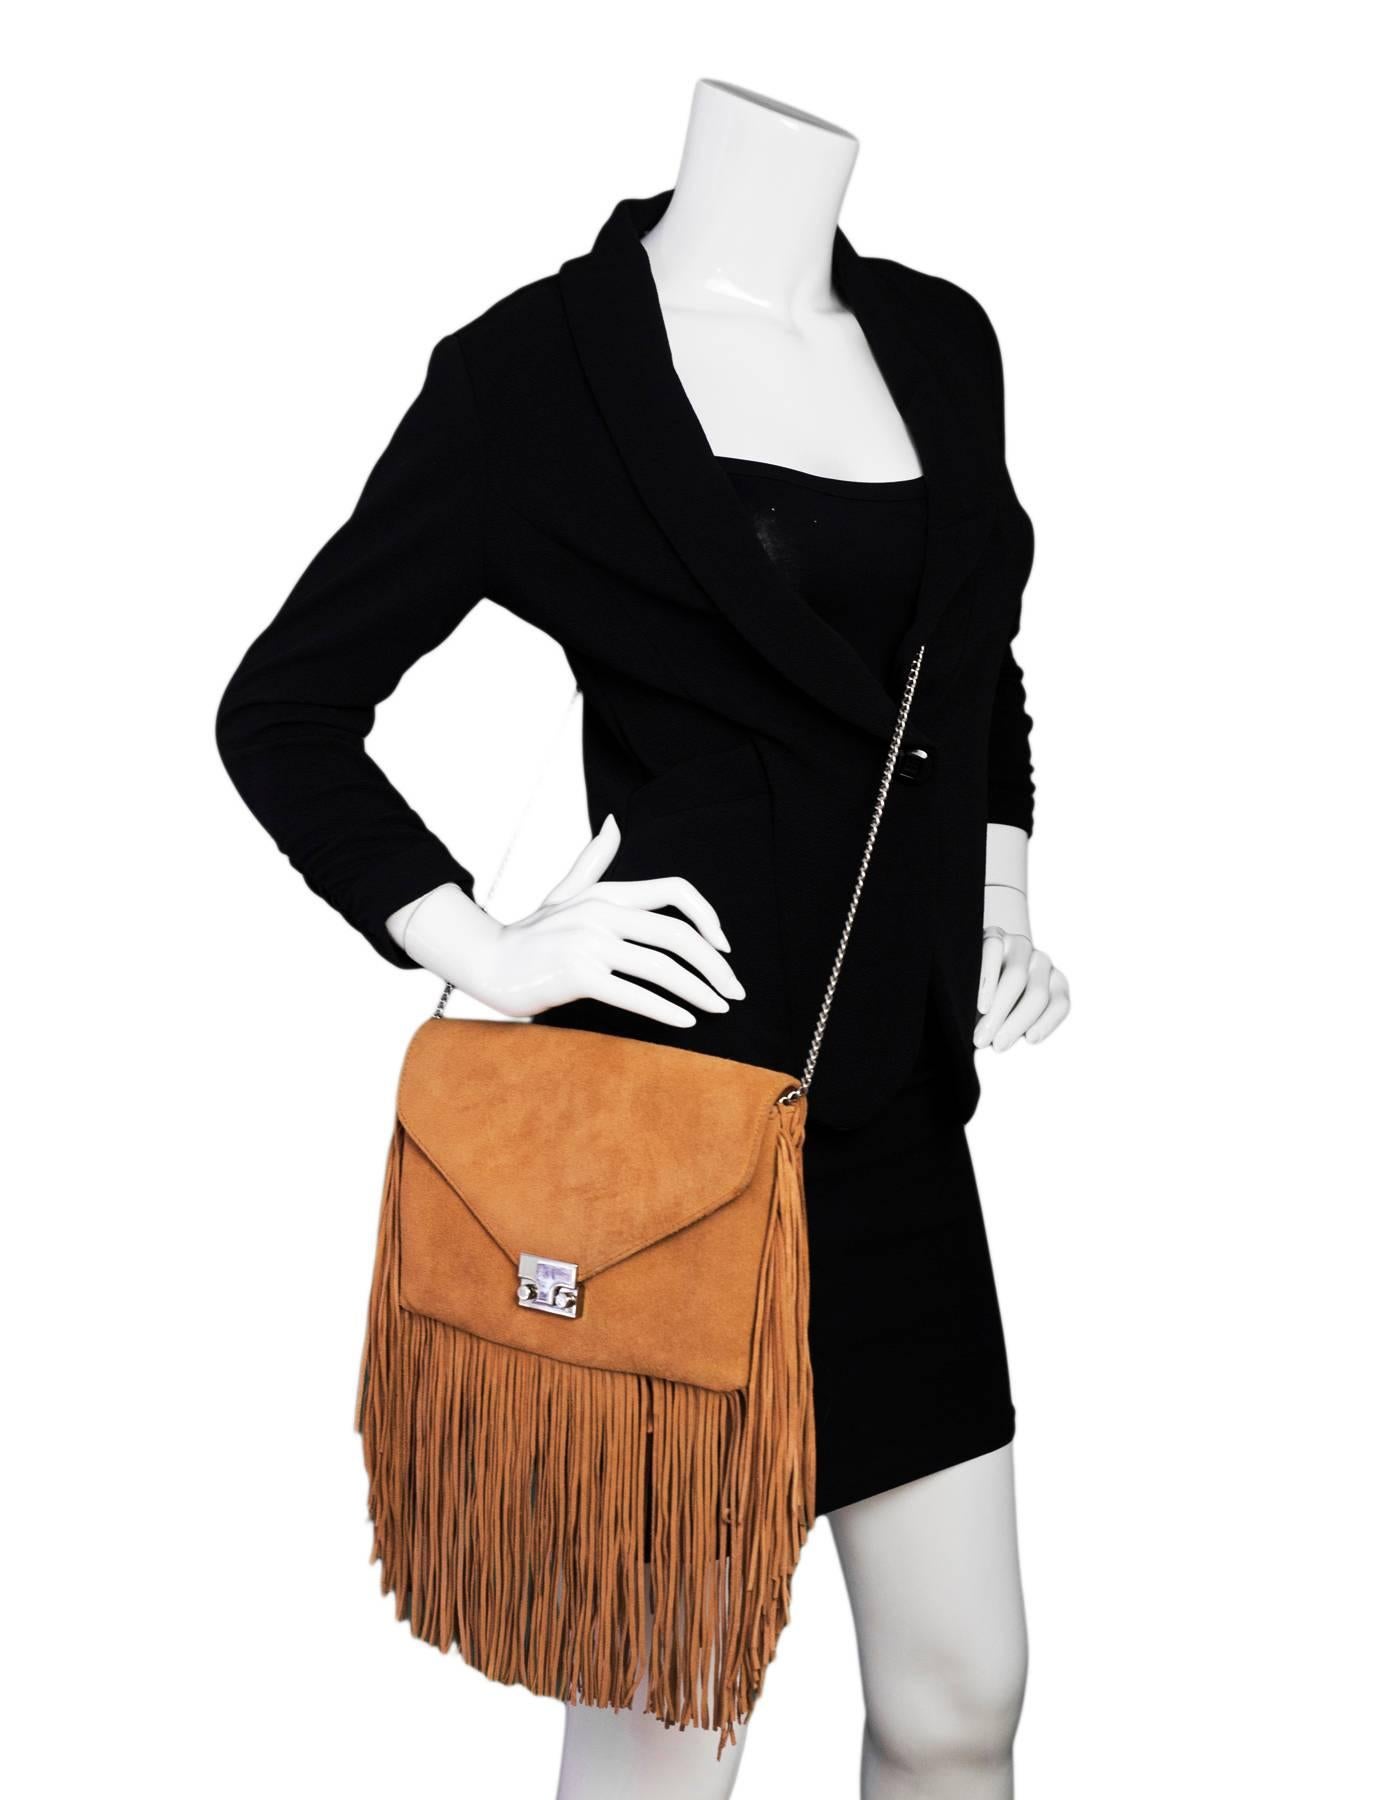 Loeffler Randall Desert Nude Suede Fringe Envelope Bag
Features fringe trim throughout

Made In: China
Color: Desert nude / tan
Hardware: Silvertone
Materials: Suede, metal
Lining: Black and white textile
Closure/opening: Flap top with push